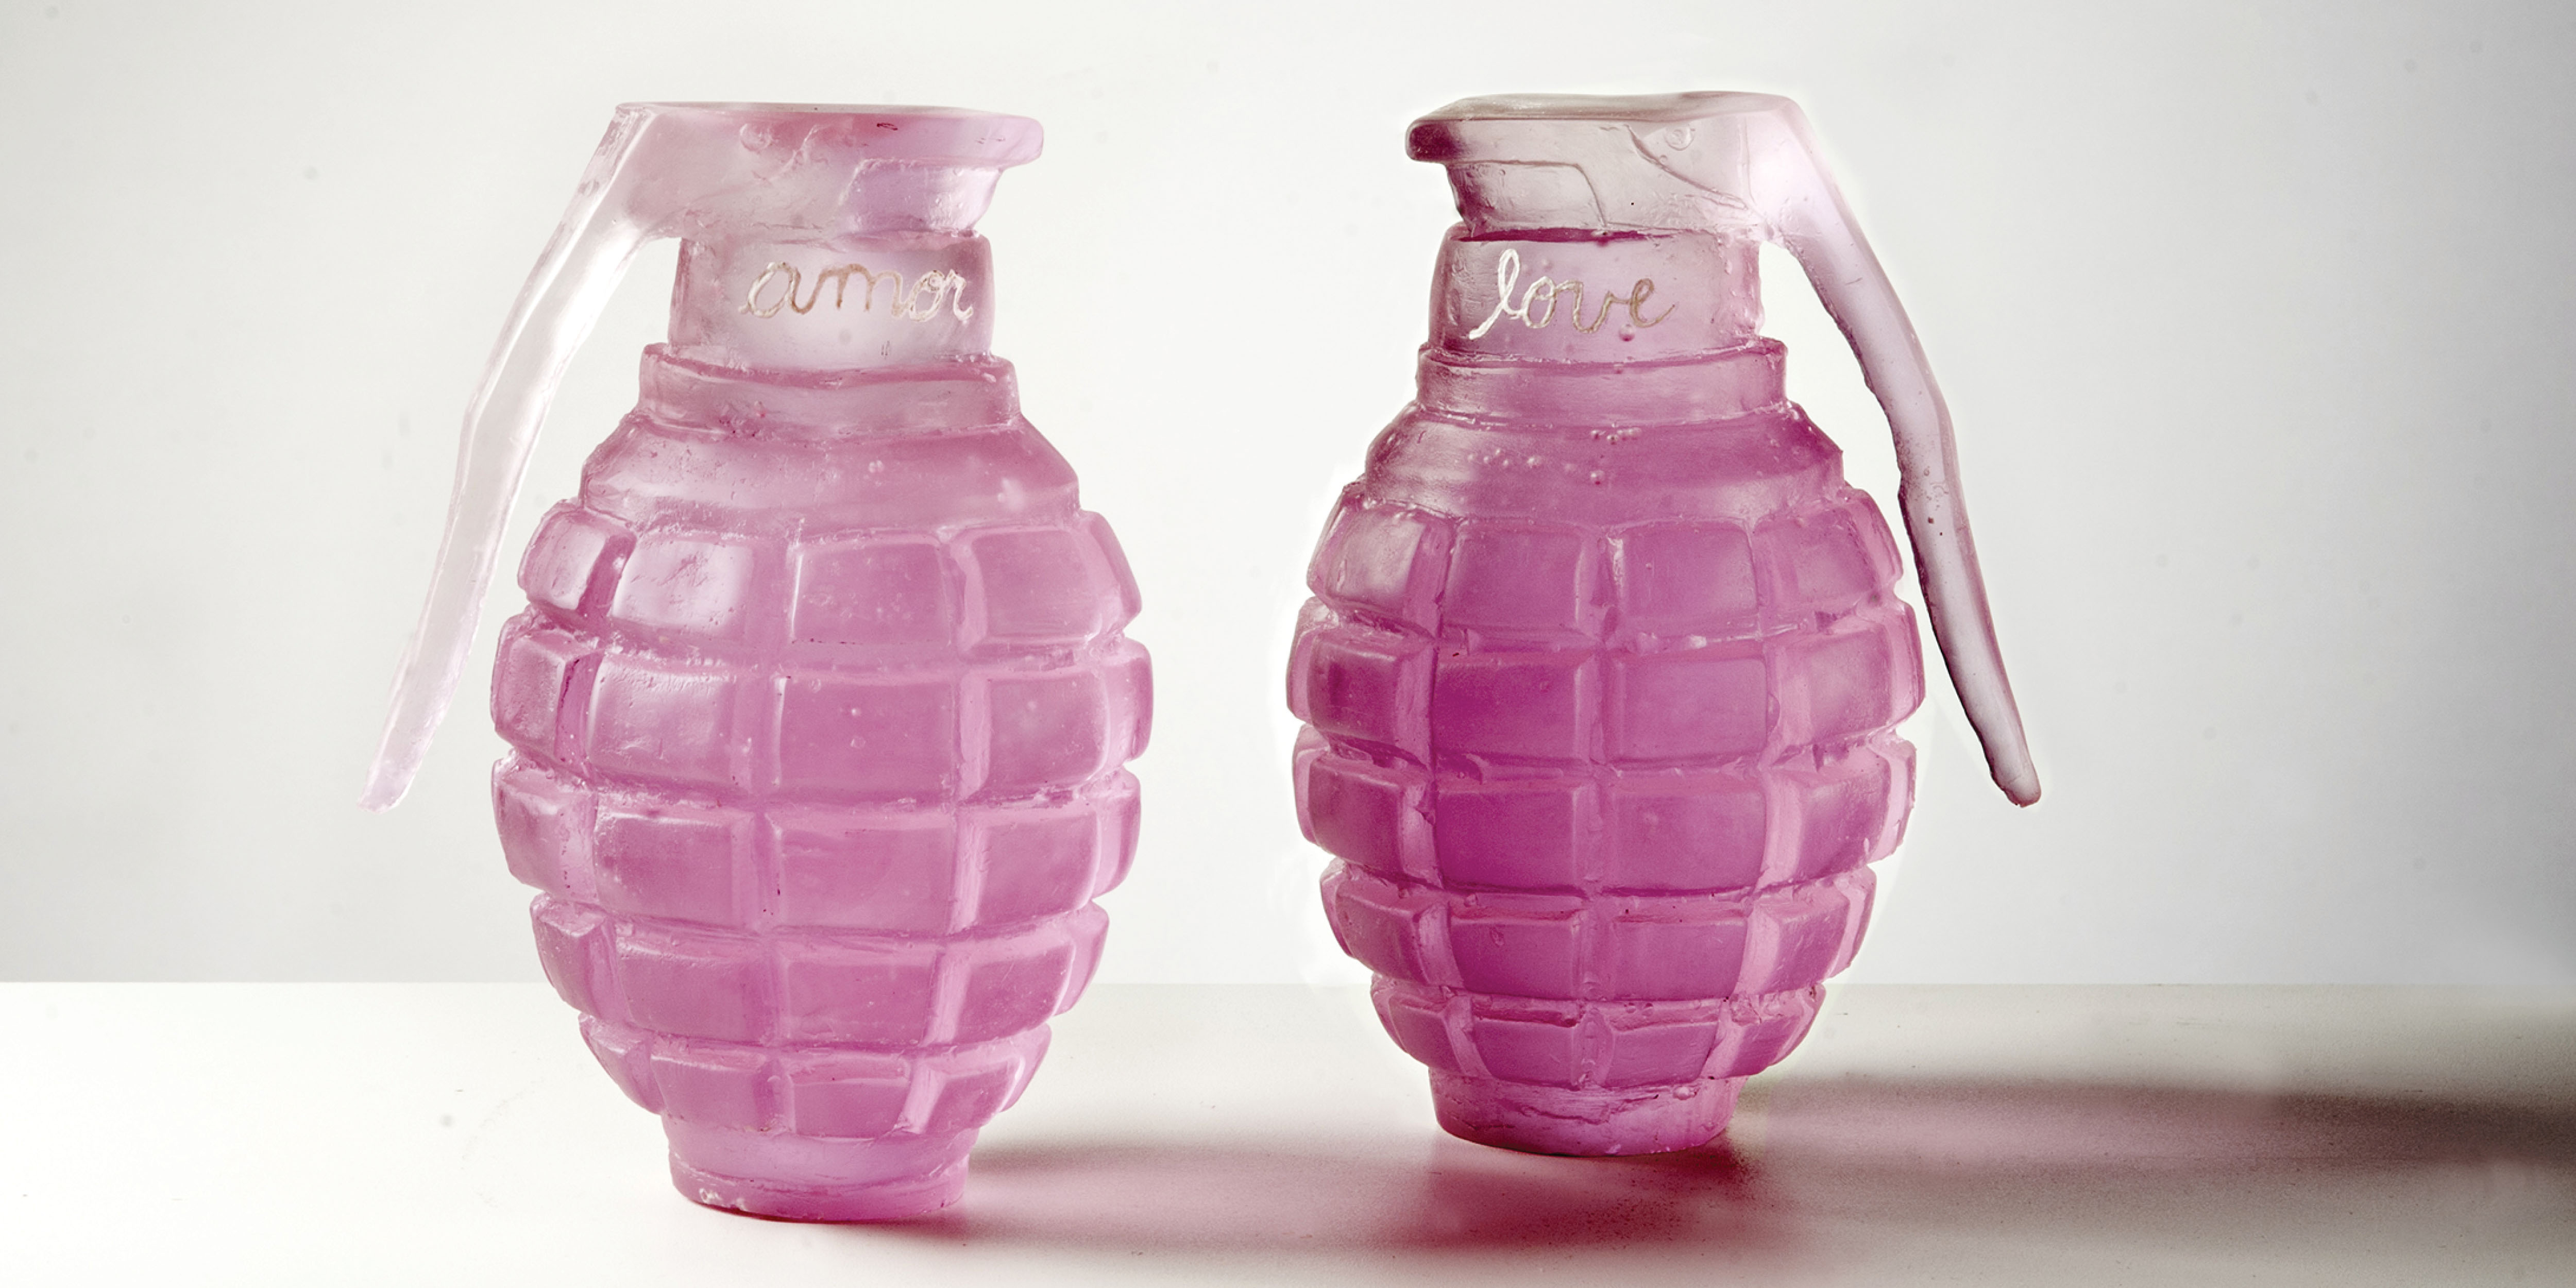 A pair of grenades cast in glass